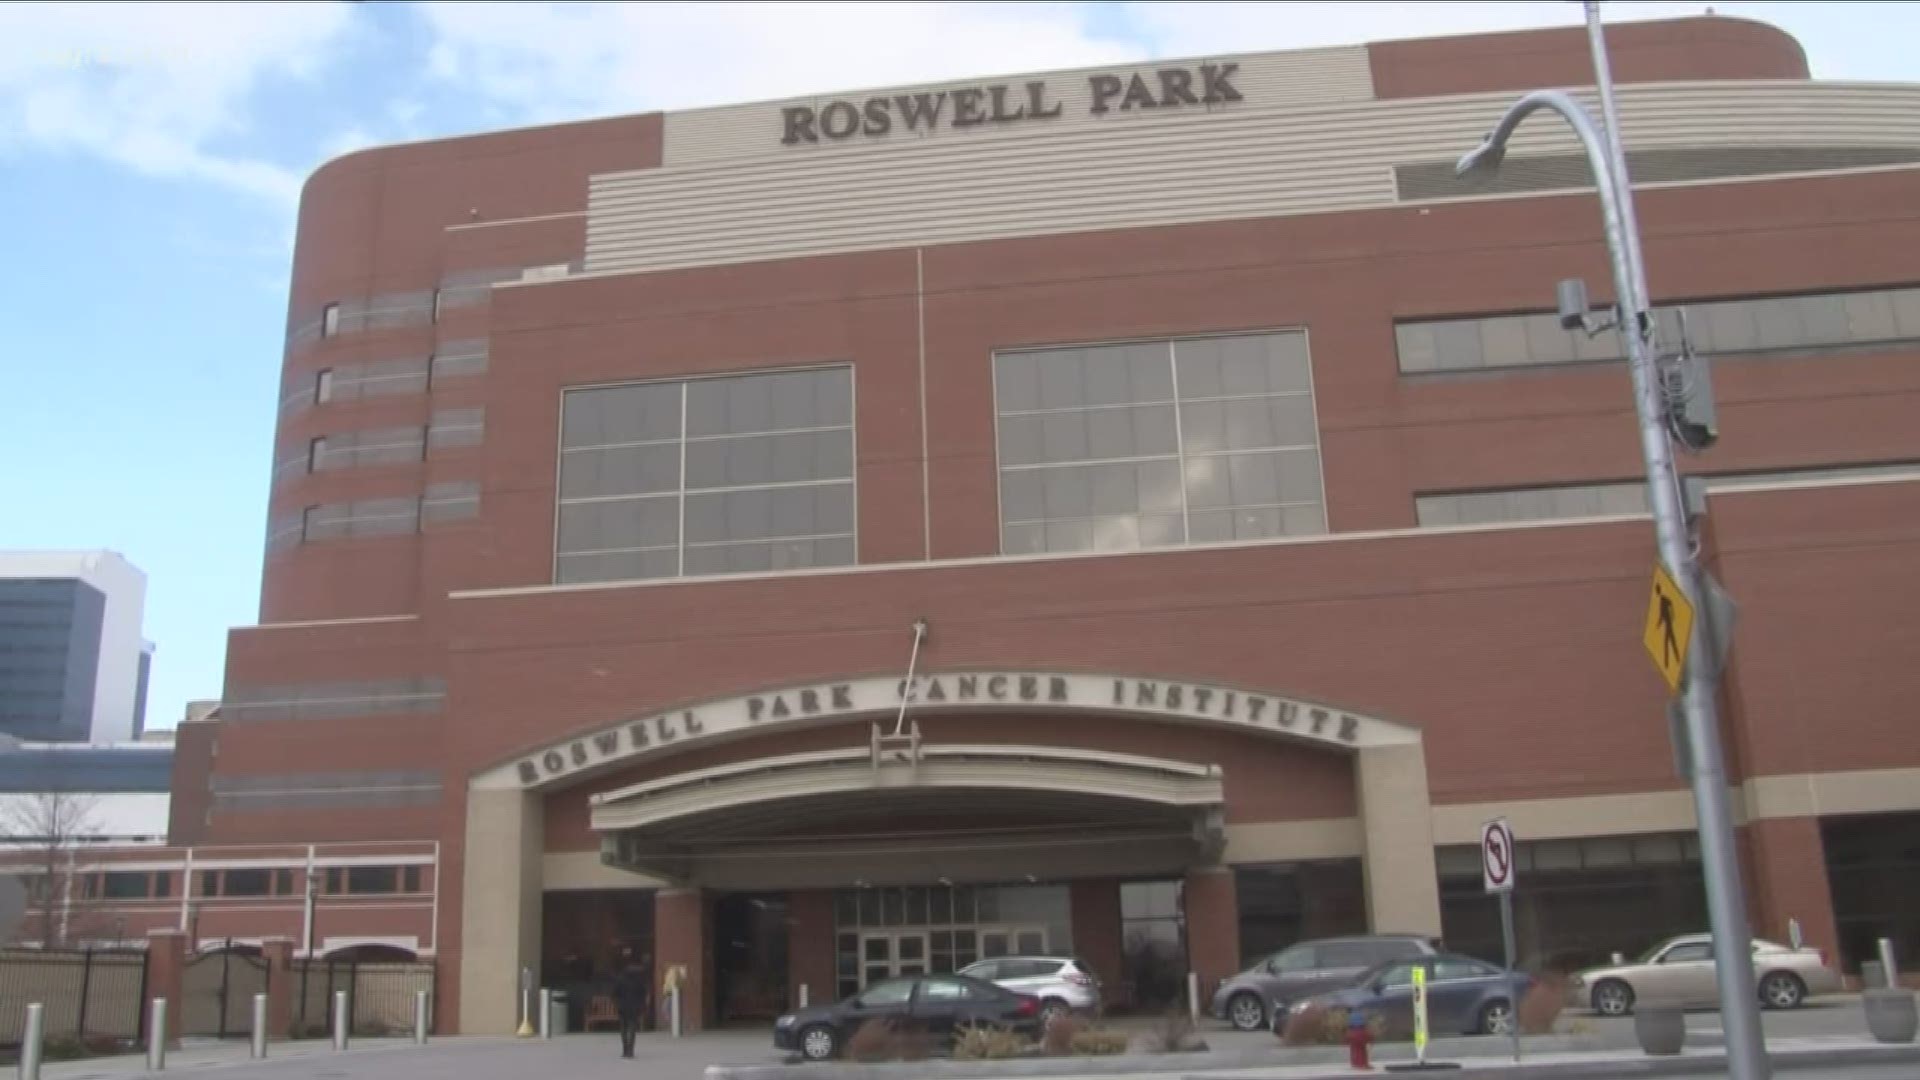 Roswell Park plans a new facility in Amherst